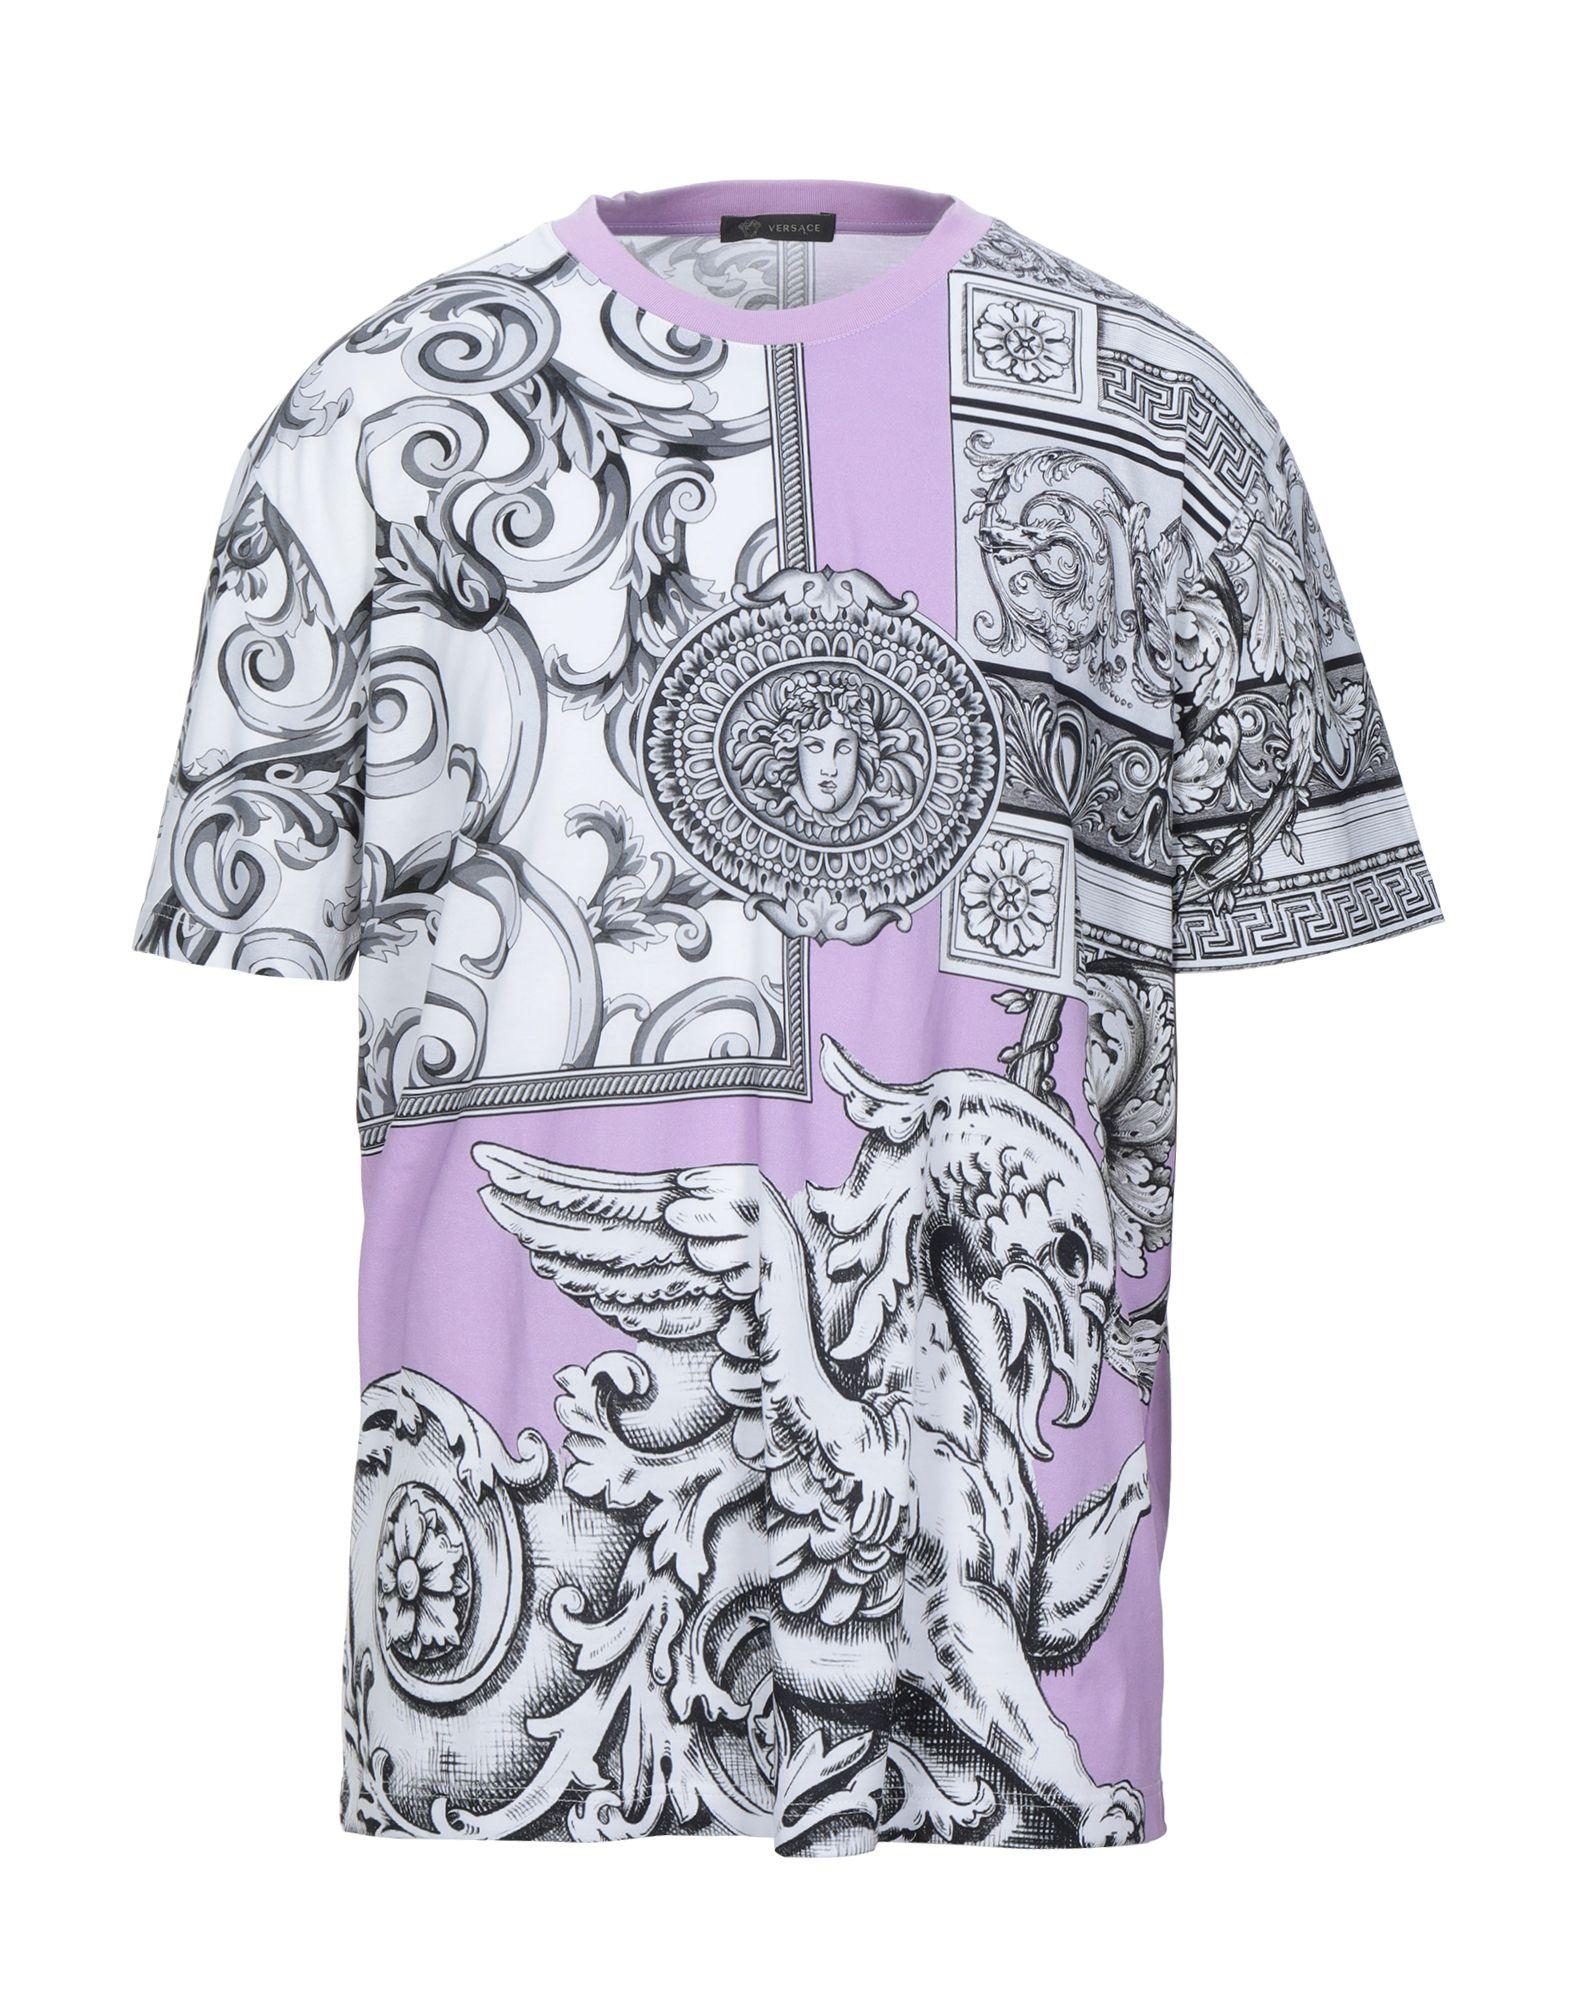 Versace T-shirt in Lilac (Purple) for Men - Lyst